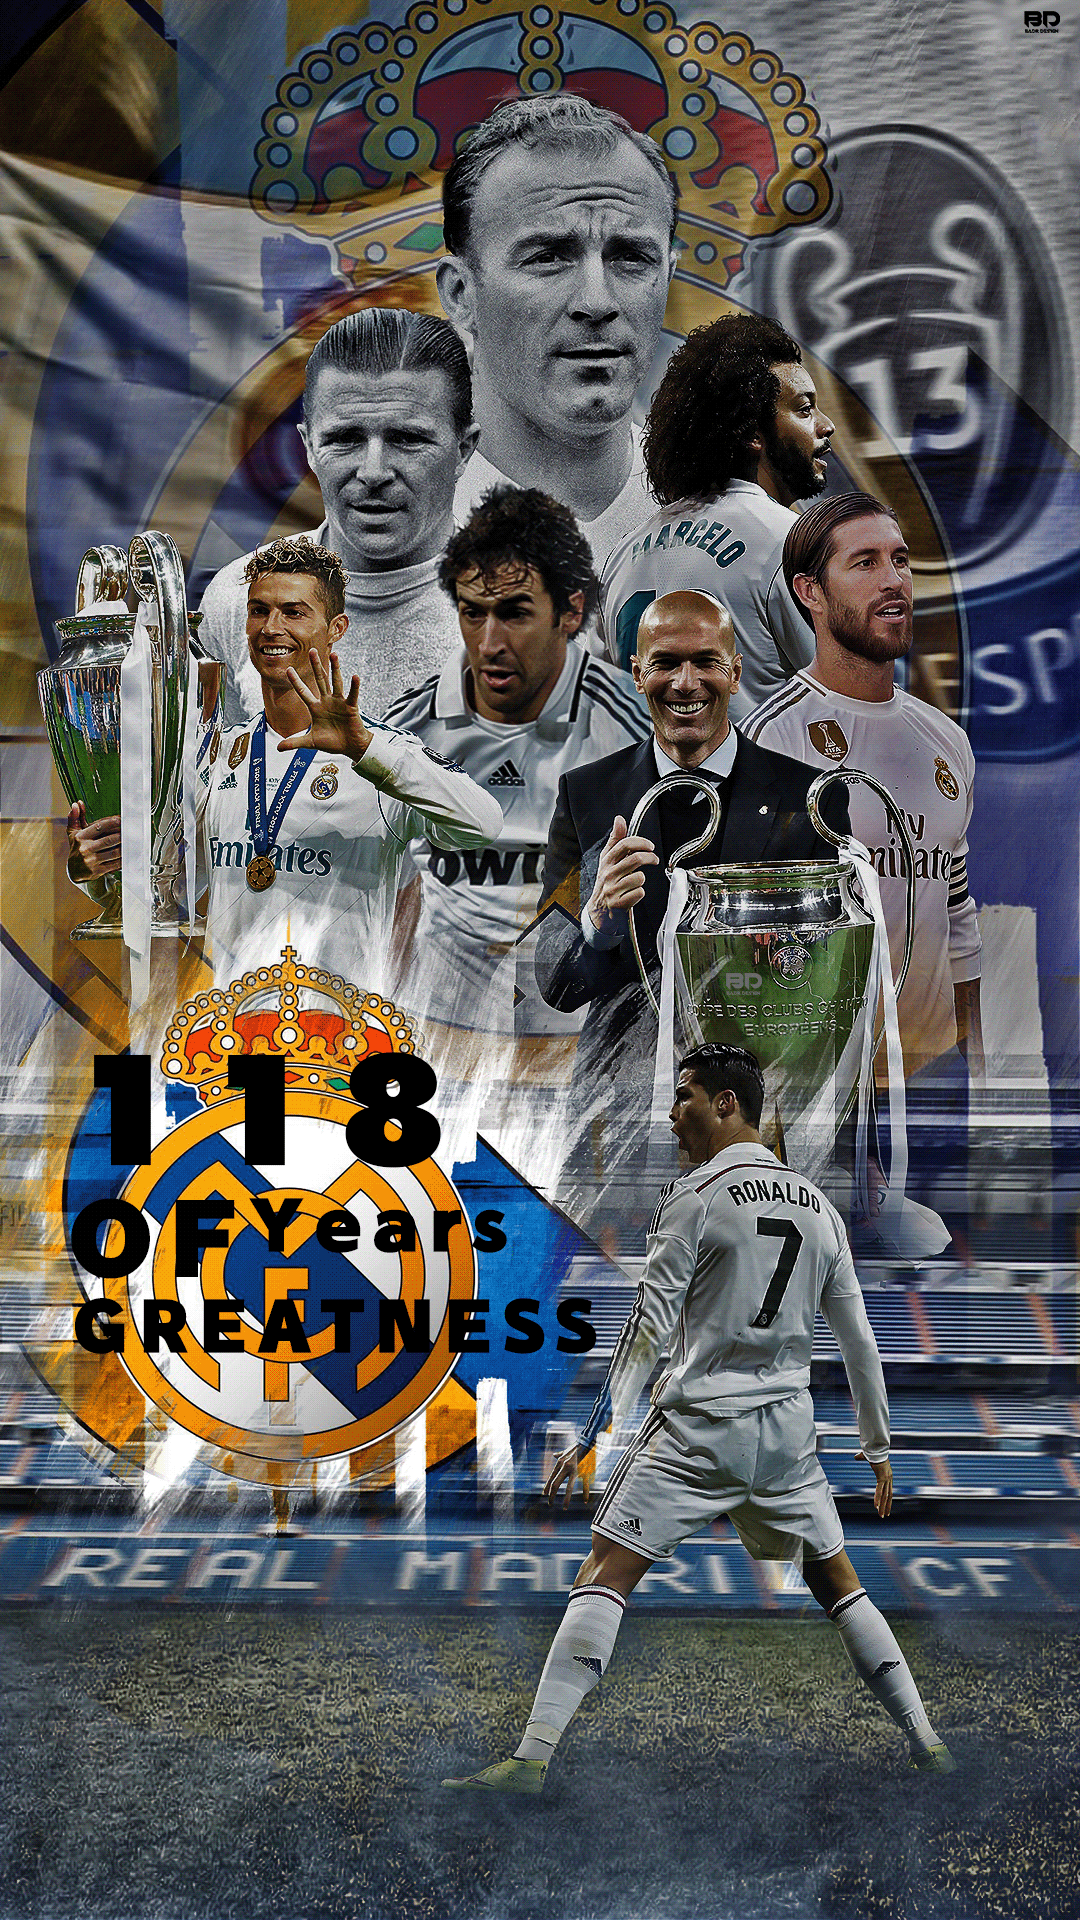 Real Madrid 118 Years Of Greatness . Wallpaper . on Behance